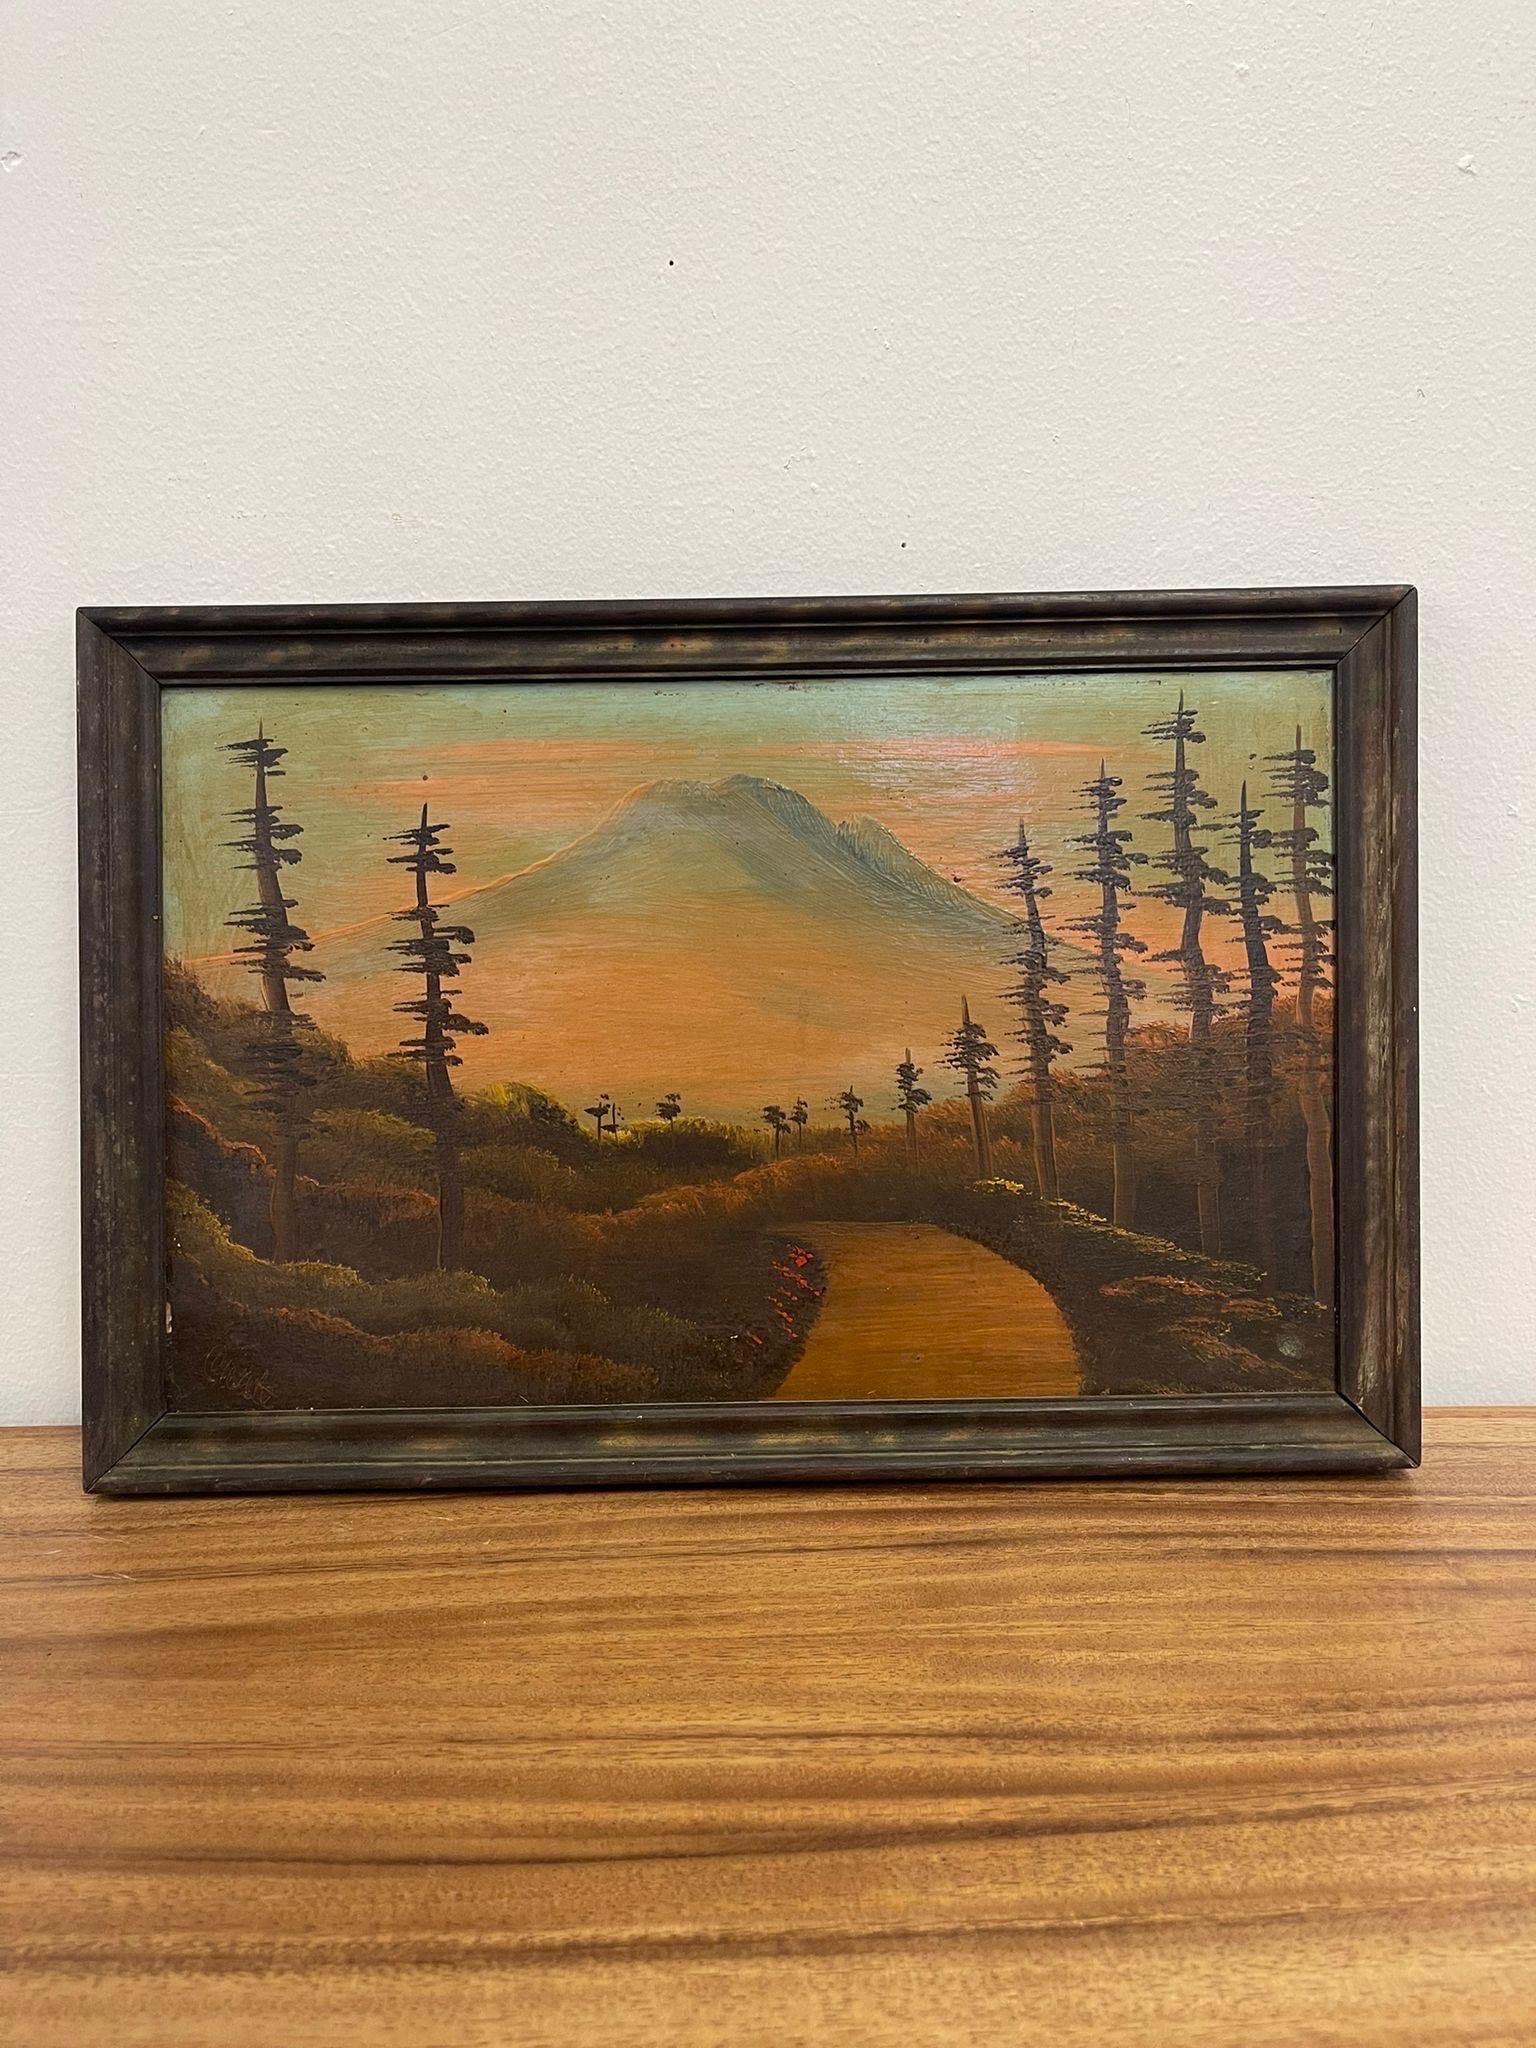 Possibly 1930s, due to Age of Frame and Petina on Painting. Possibly Oil or Acrylic on Canvas. Mountain Forest Scene. Vintage Condition Consistent with Age as Pictured.

Dimensions. 11 W ; 3/4 D ; 6 H